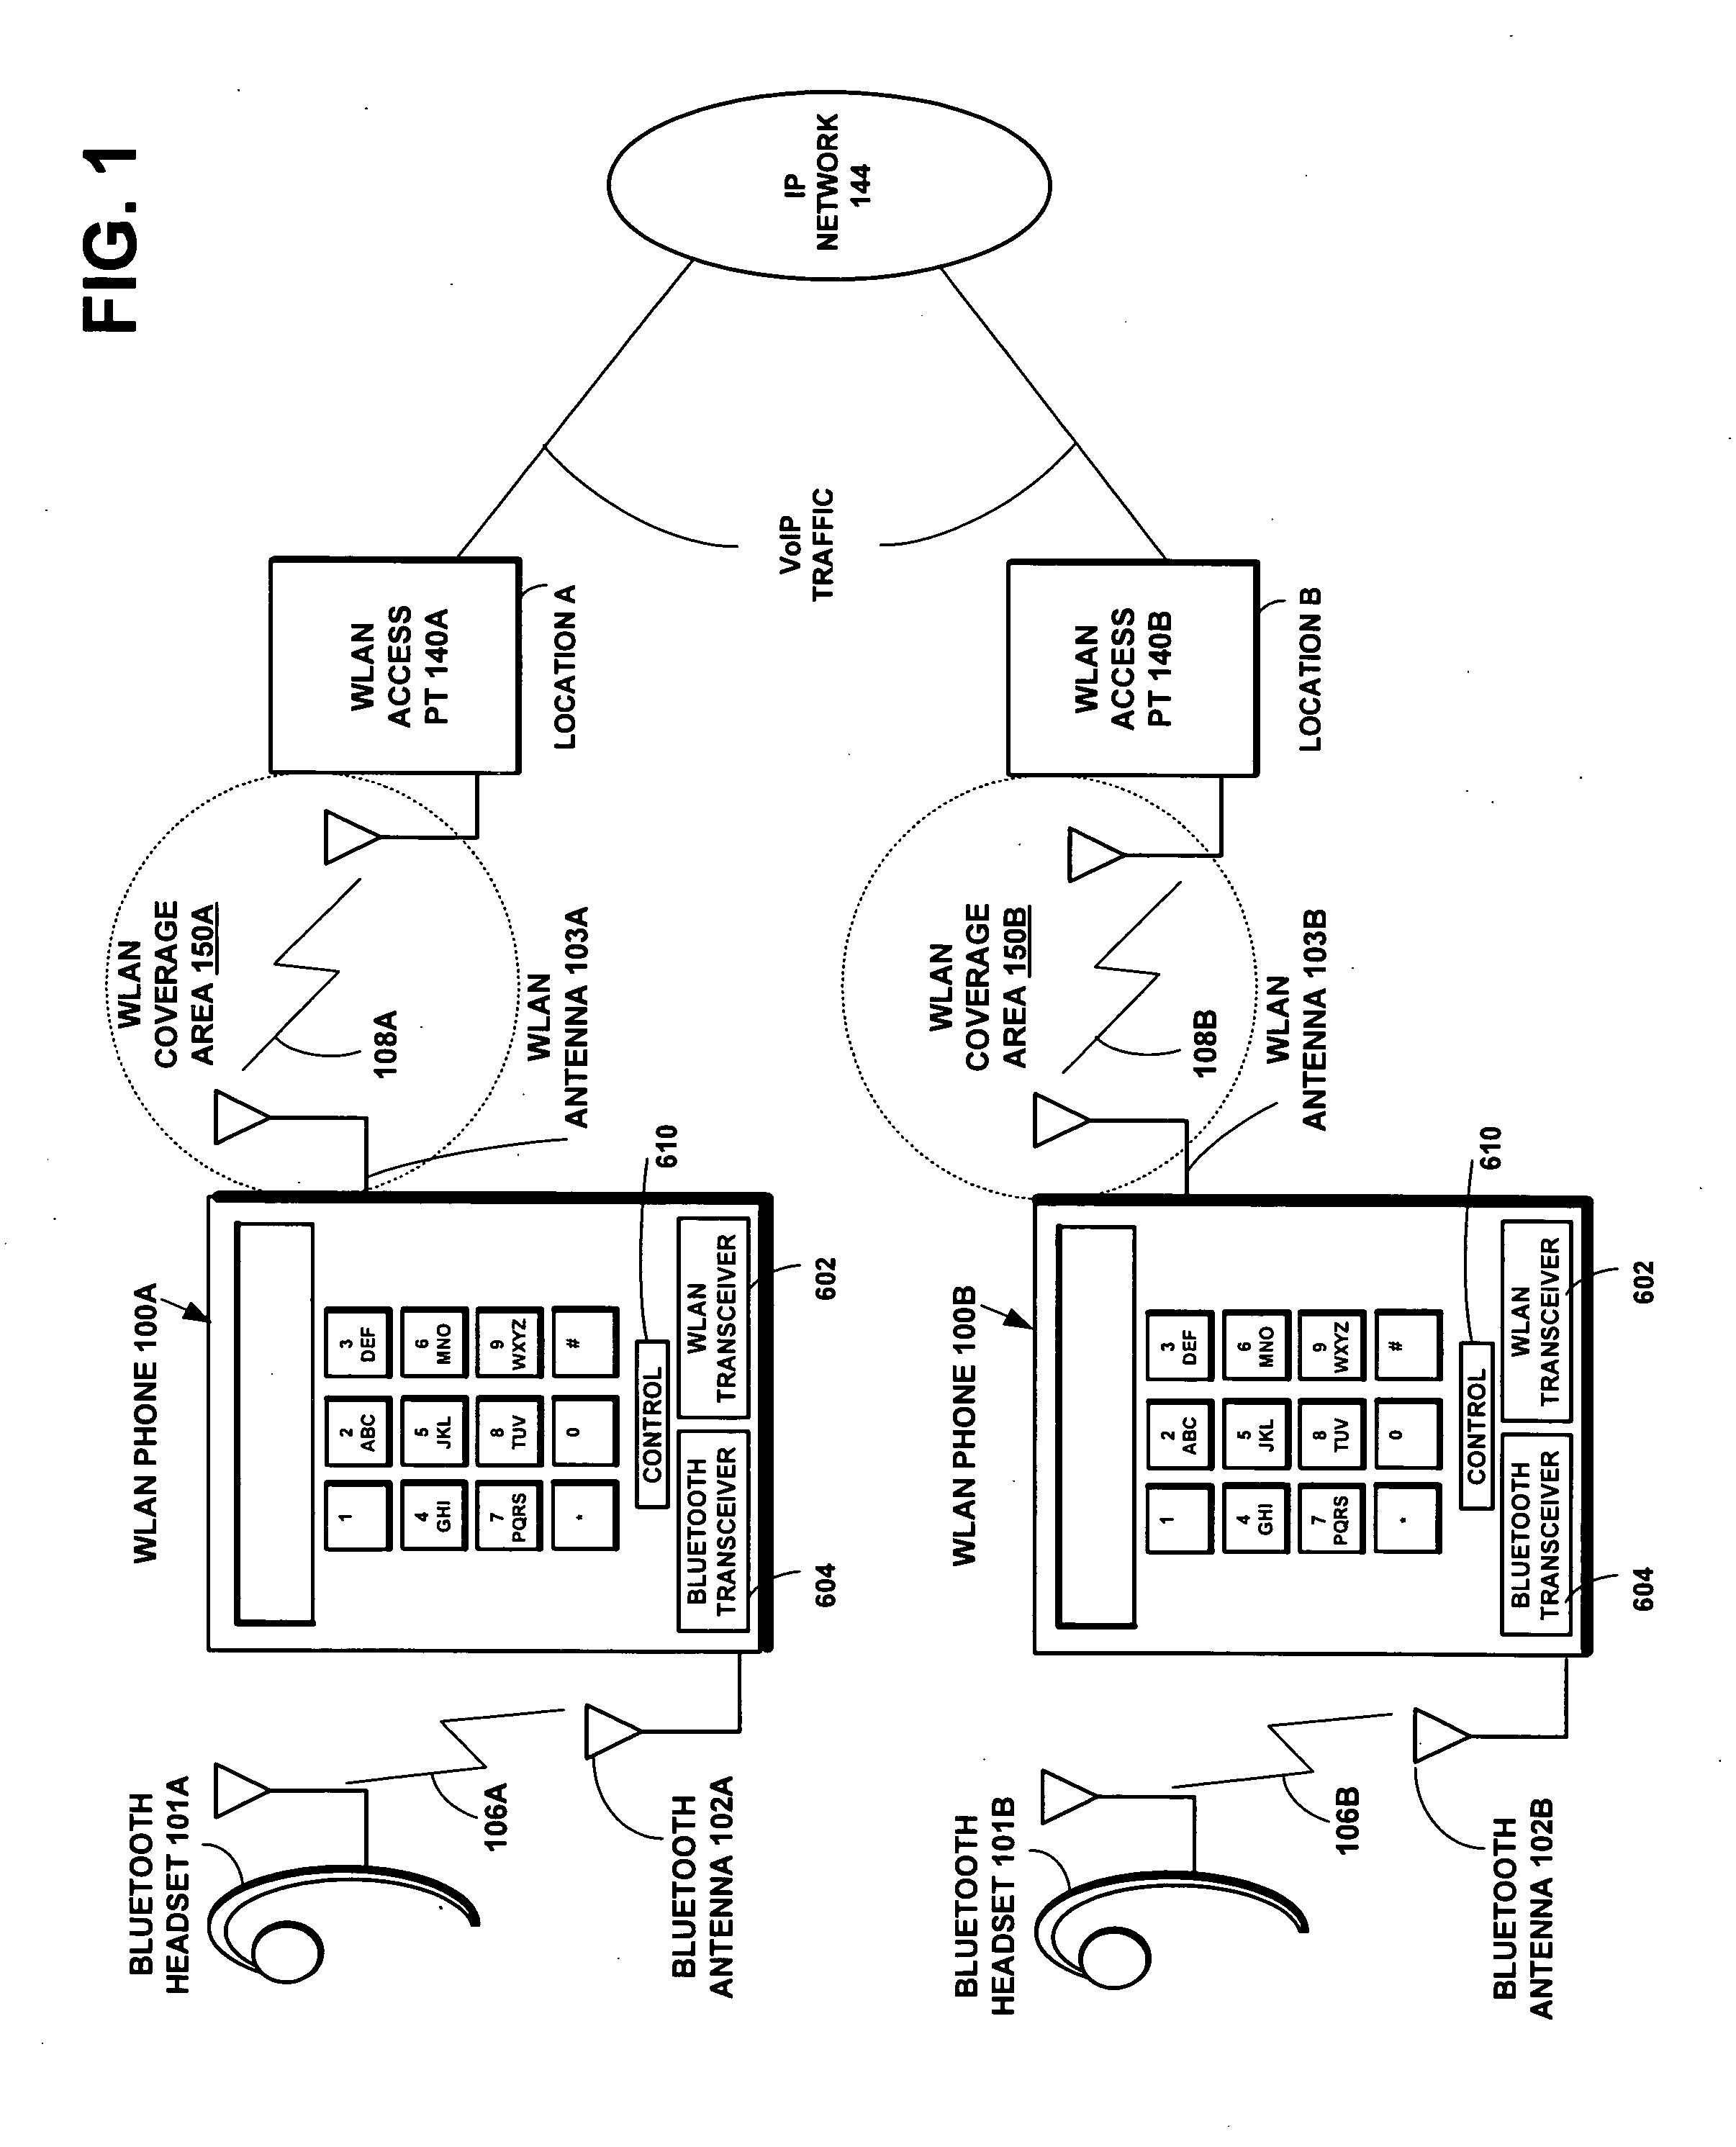 Method and system for VoIP over WLAN to bluetooth headset using advanced eSCO scheduling